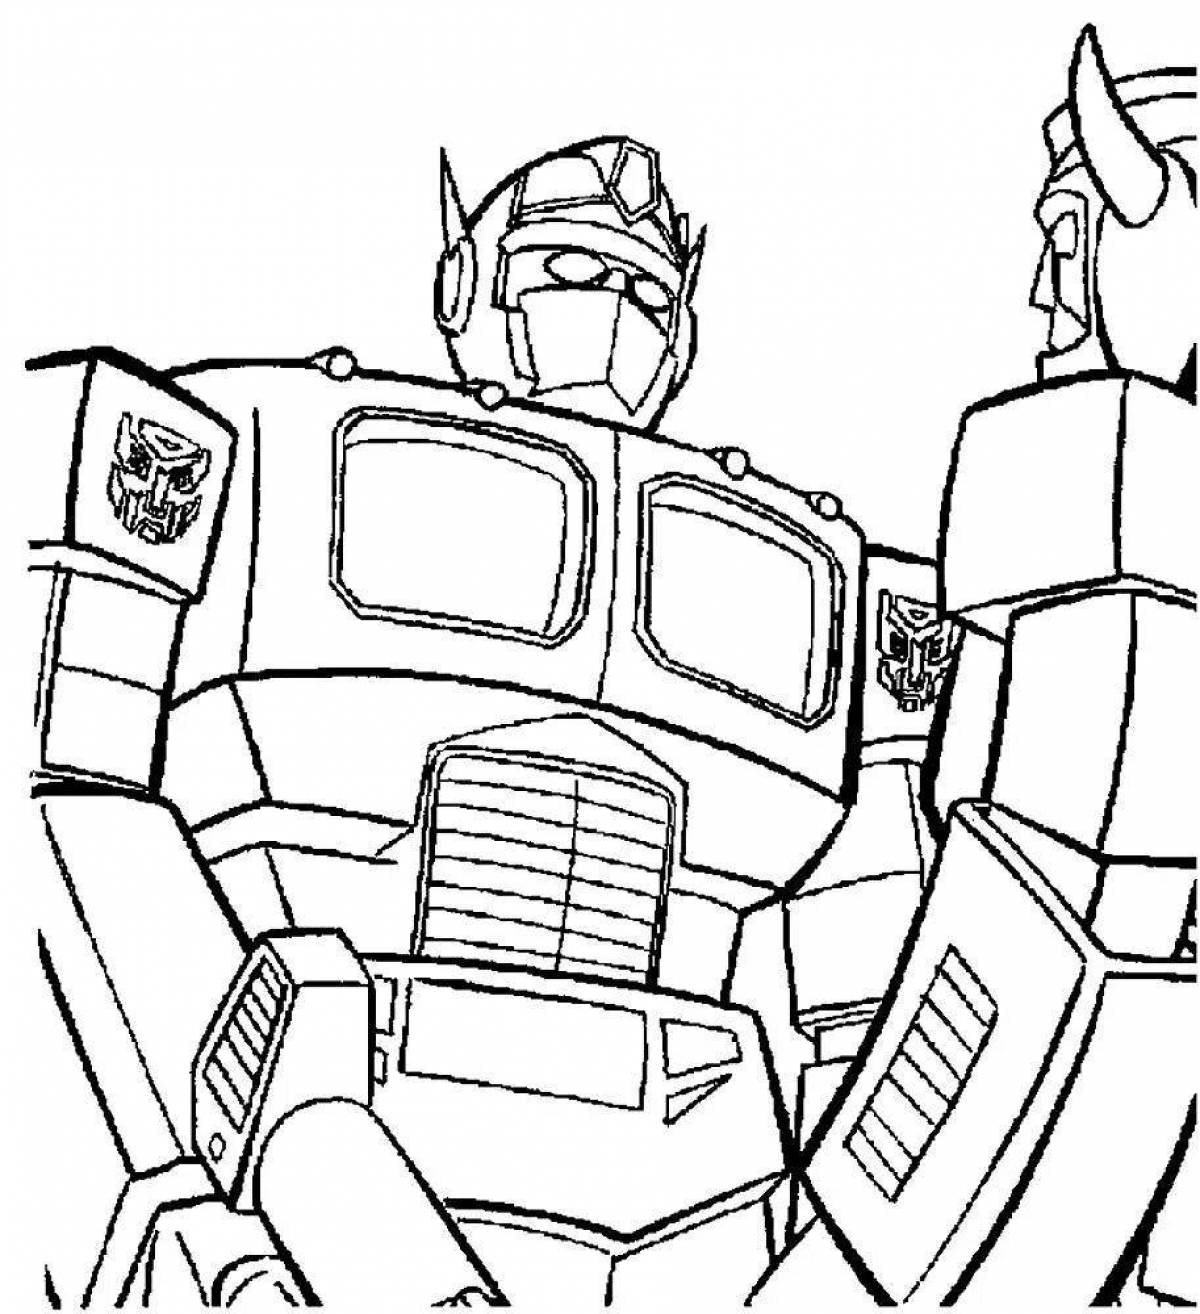 A fun Autobot coloring book for kids